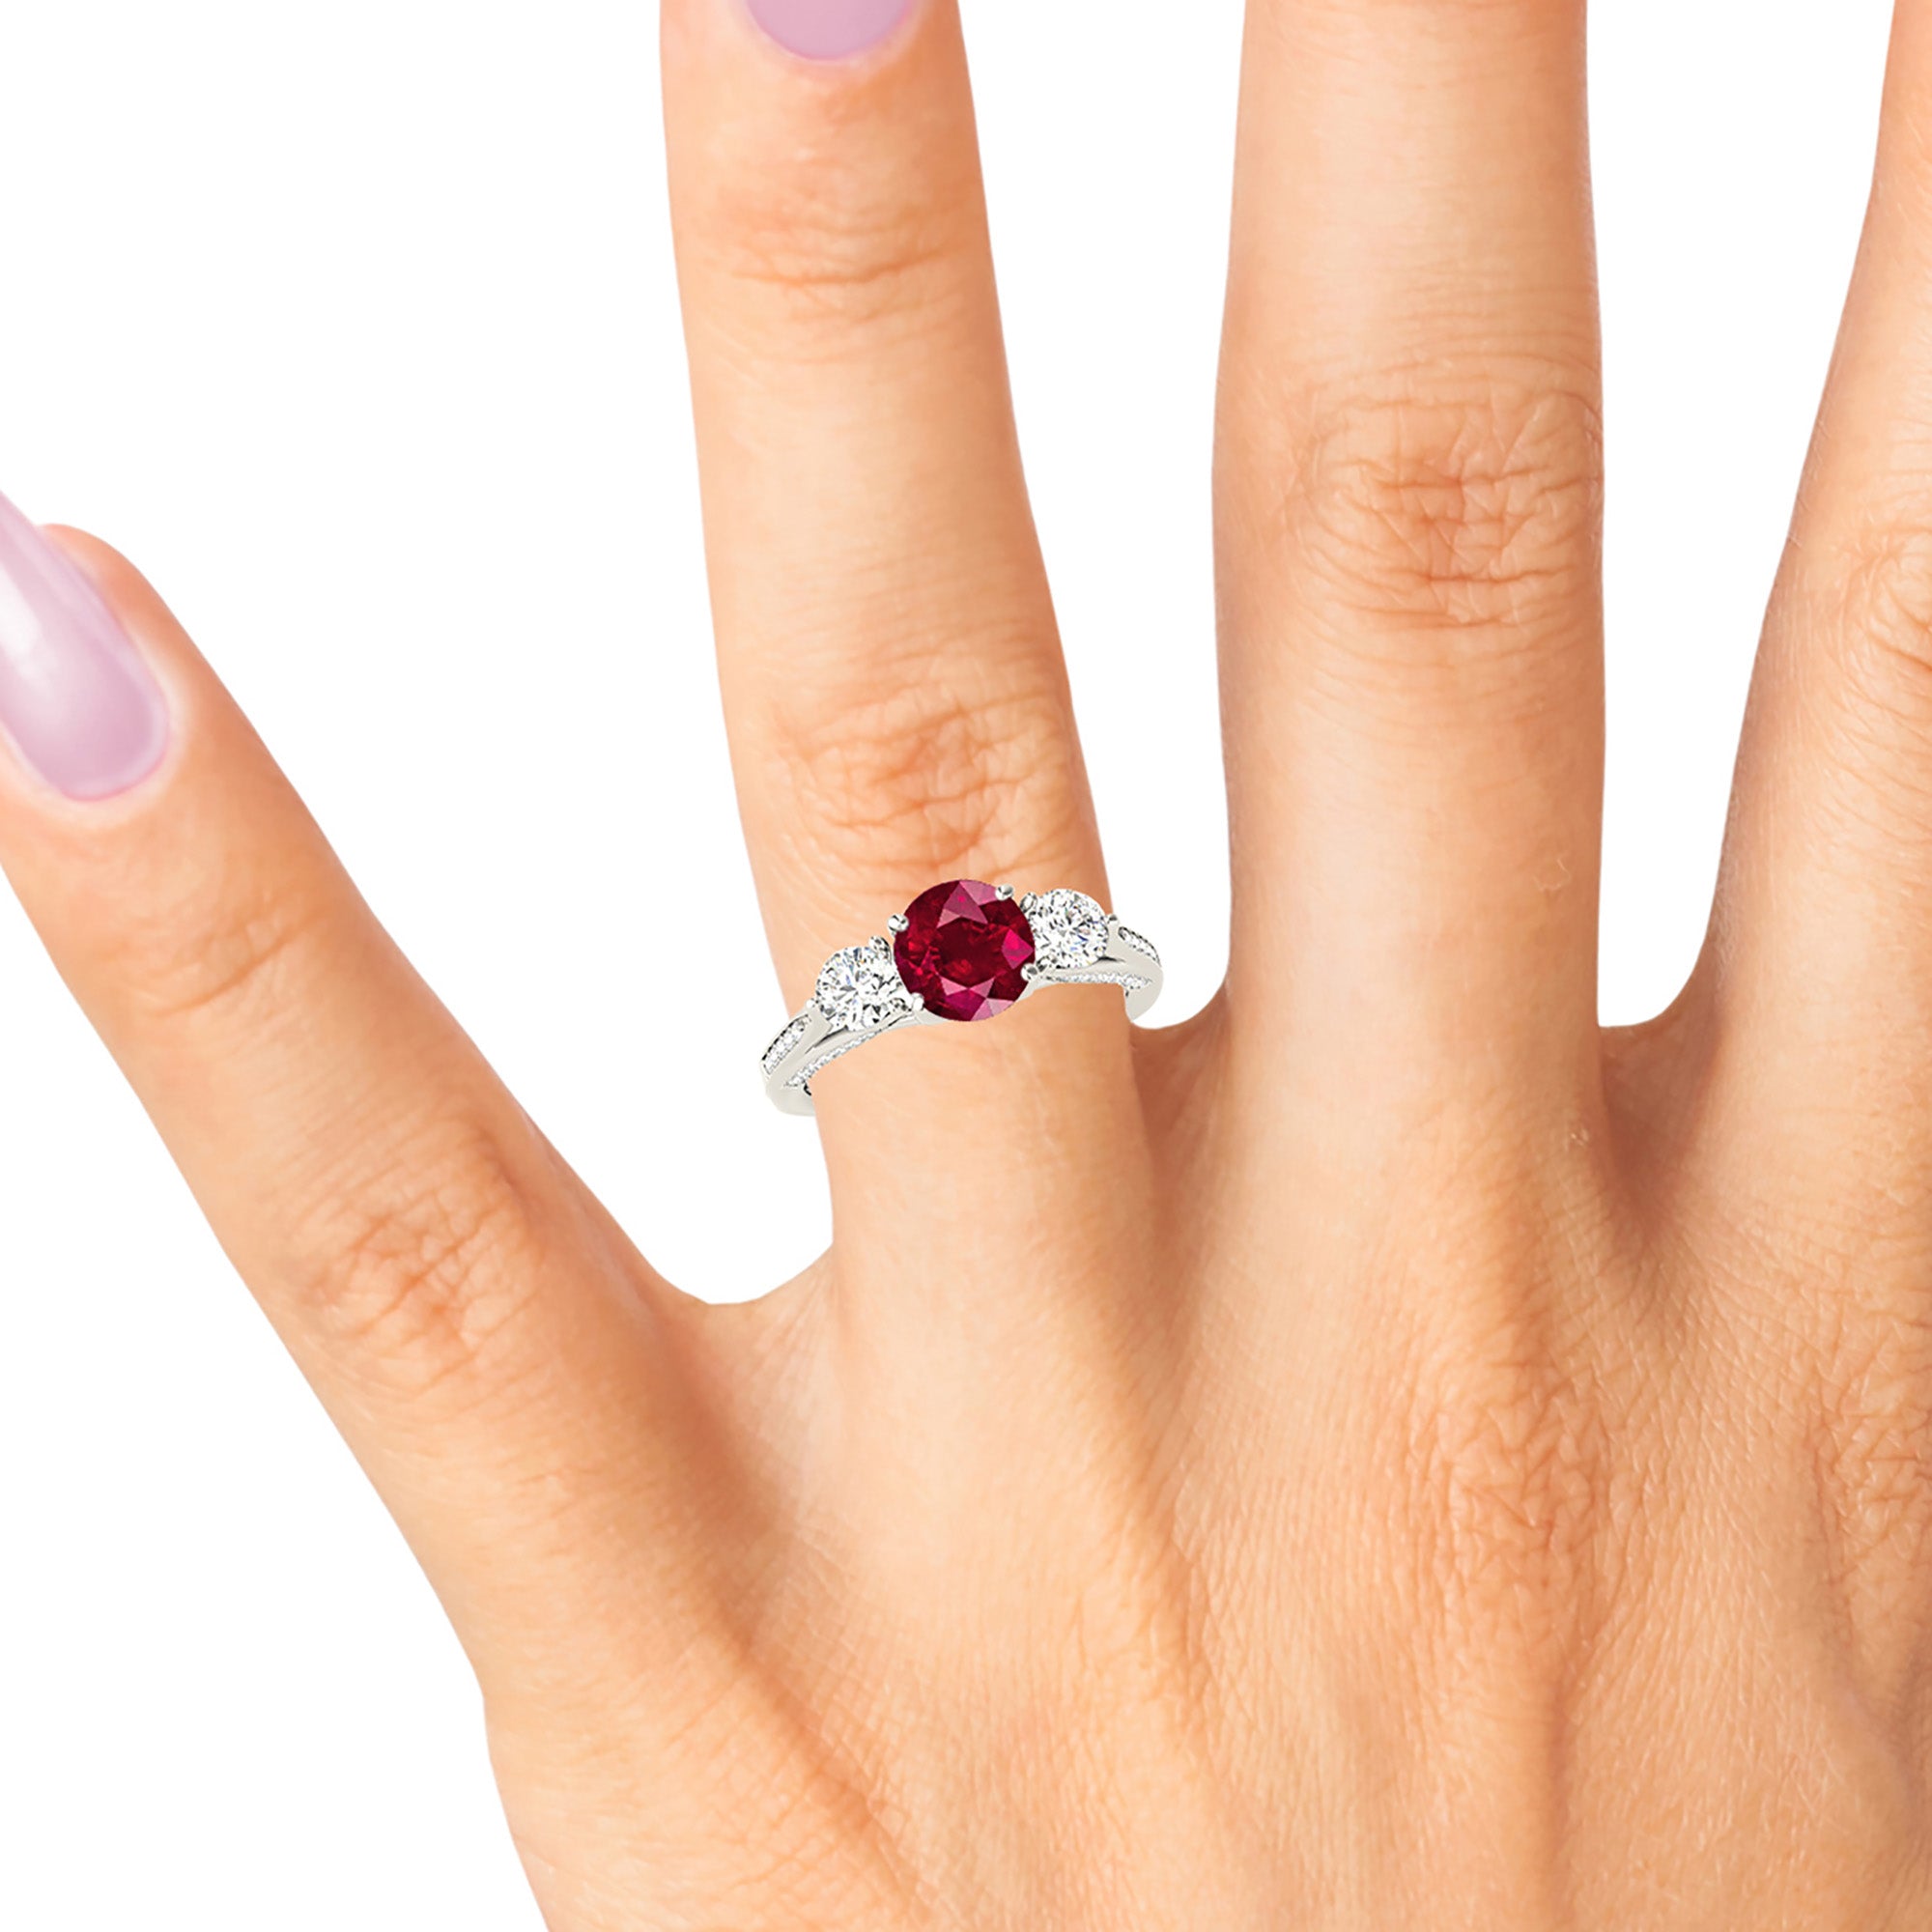 1.35 ct. Genuine Ruby ring With 0.75 ctw. Two Round Side Diamonds, 3 Stone Engagement Ring-in 14K/18K White, Yellow, Rose Gold and Platinum - Christmas Jewelry Gift -VIRABYANI